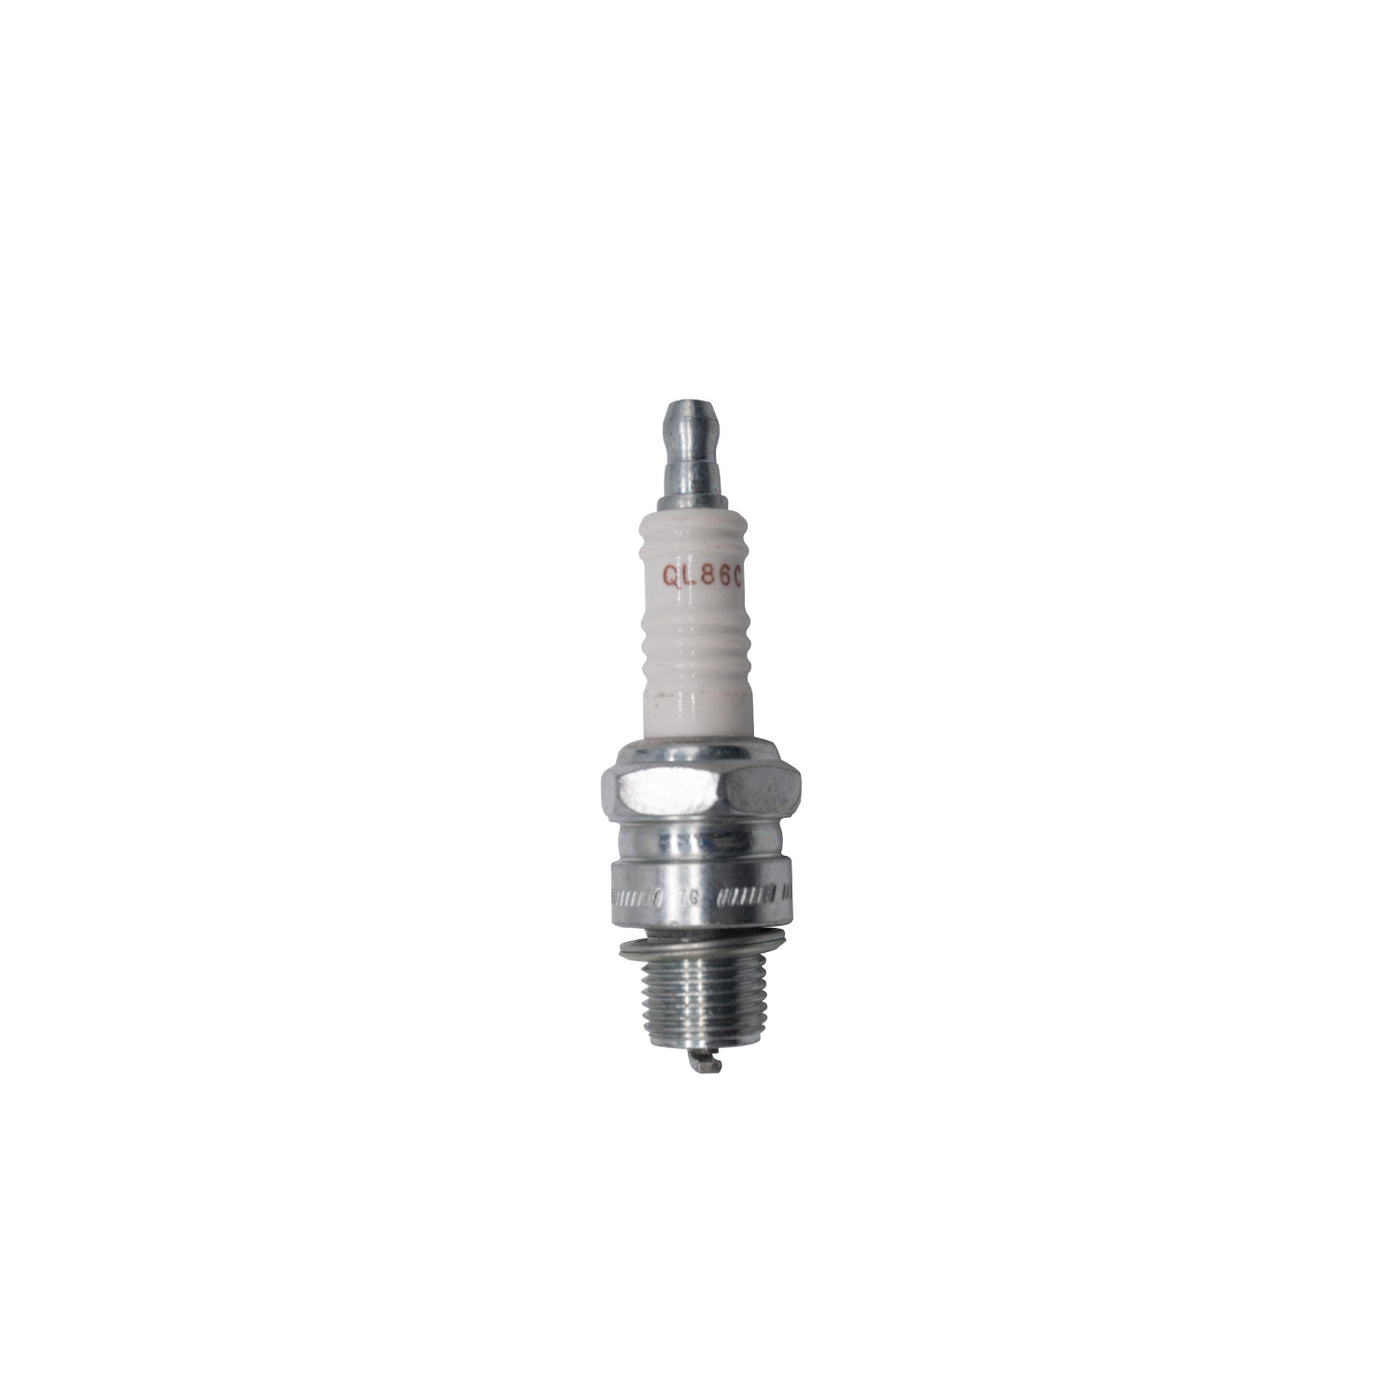 This is a Champion 933M QL86C Spark Plug for Evinrude E-TEC 2-Stroke outboard motors (0437682)